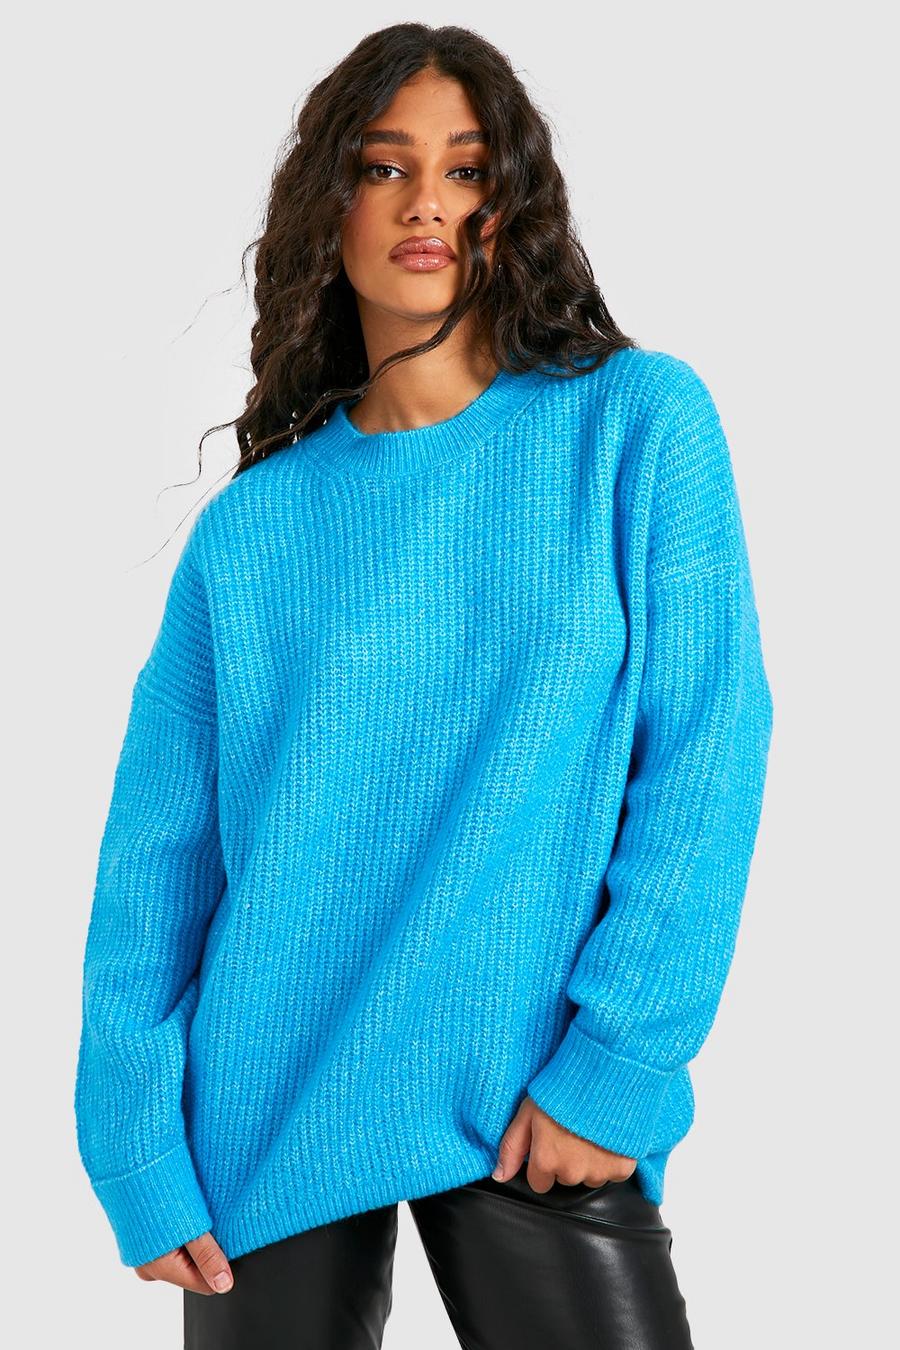 Turquoise blue Turn Up Cuff Soft Knit Fisherman Knitted Jumper